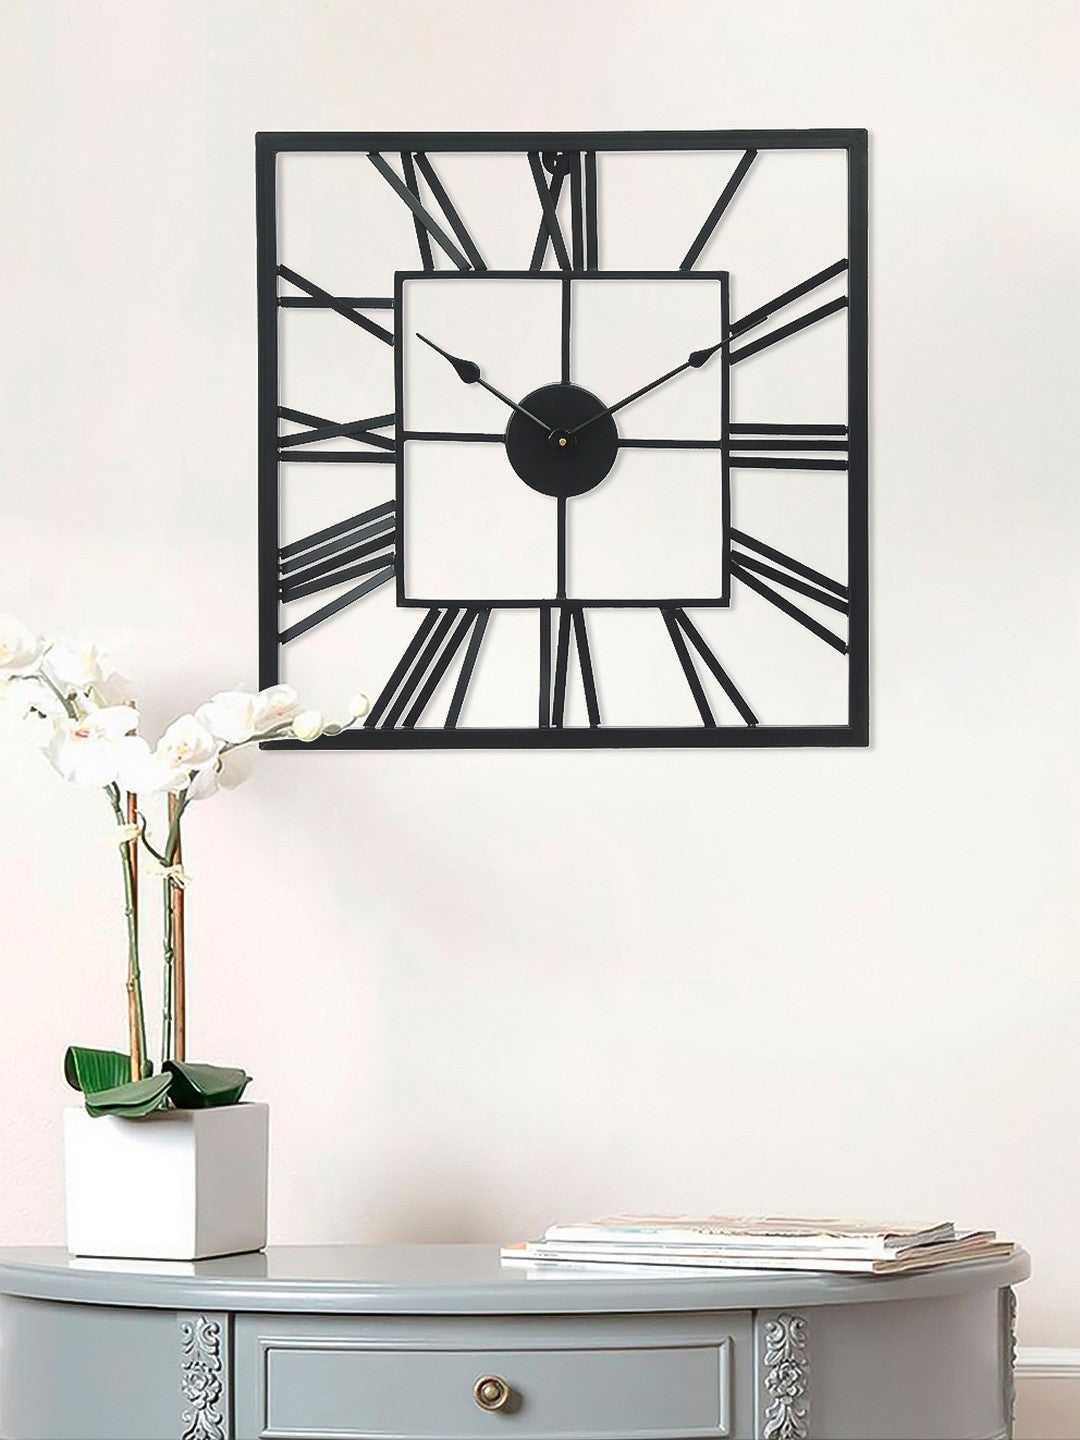 Black Iron Square Handcrafted Analog Roman Numeral Wall Clock Without Glass 2